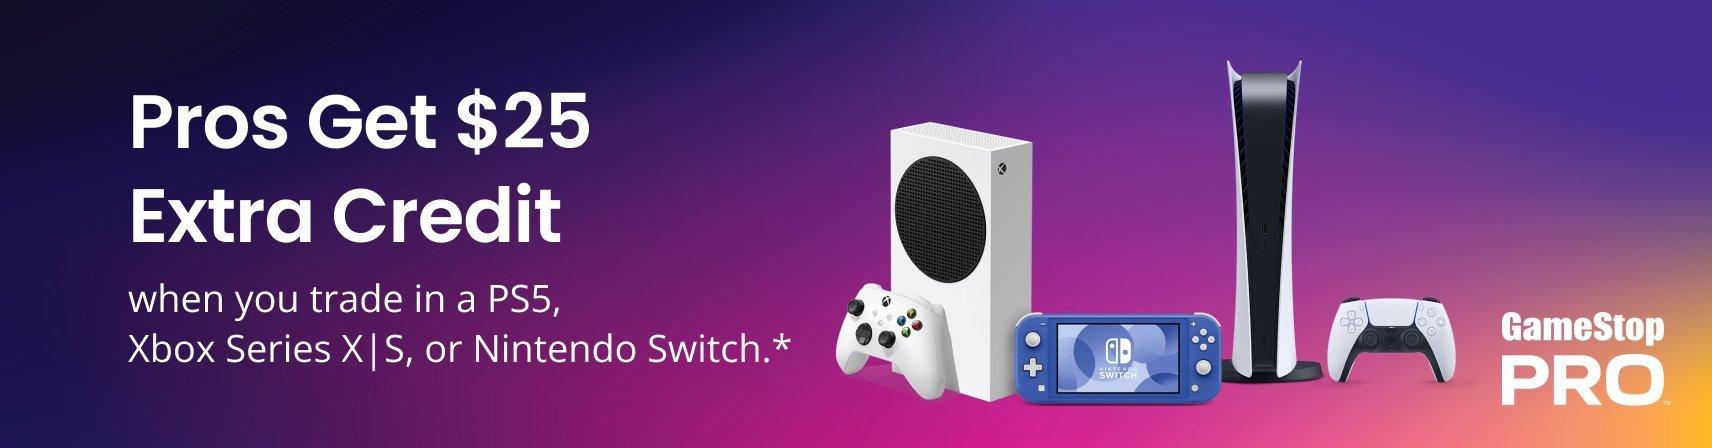 Pro Exclusive - Get $25 Extra Trade Credit when Trading In PS5, XBOX Series S/X and Nintendo Switch Consoles